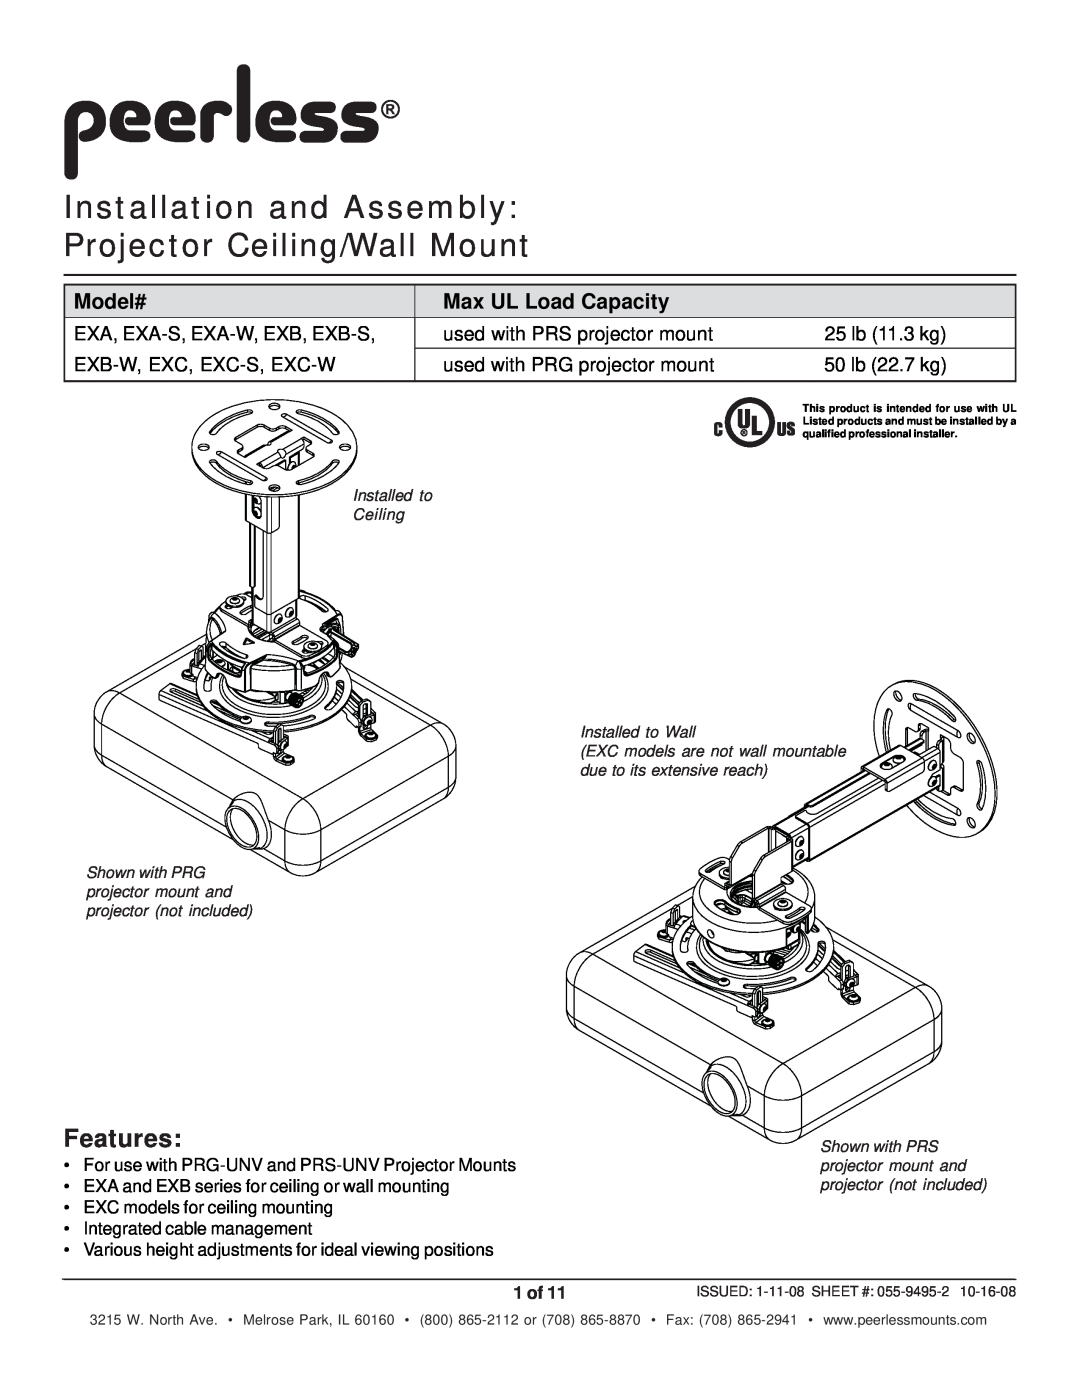 Peerless Industries EXB-S manual Features, For use with PRG-UNV and PRS-UNV Projector Mounts, Model#, Max UL Load Capacity 